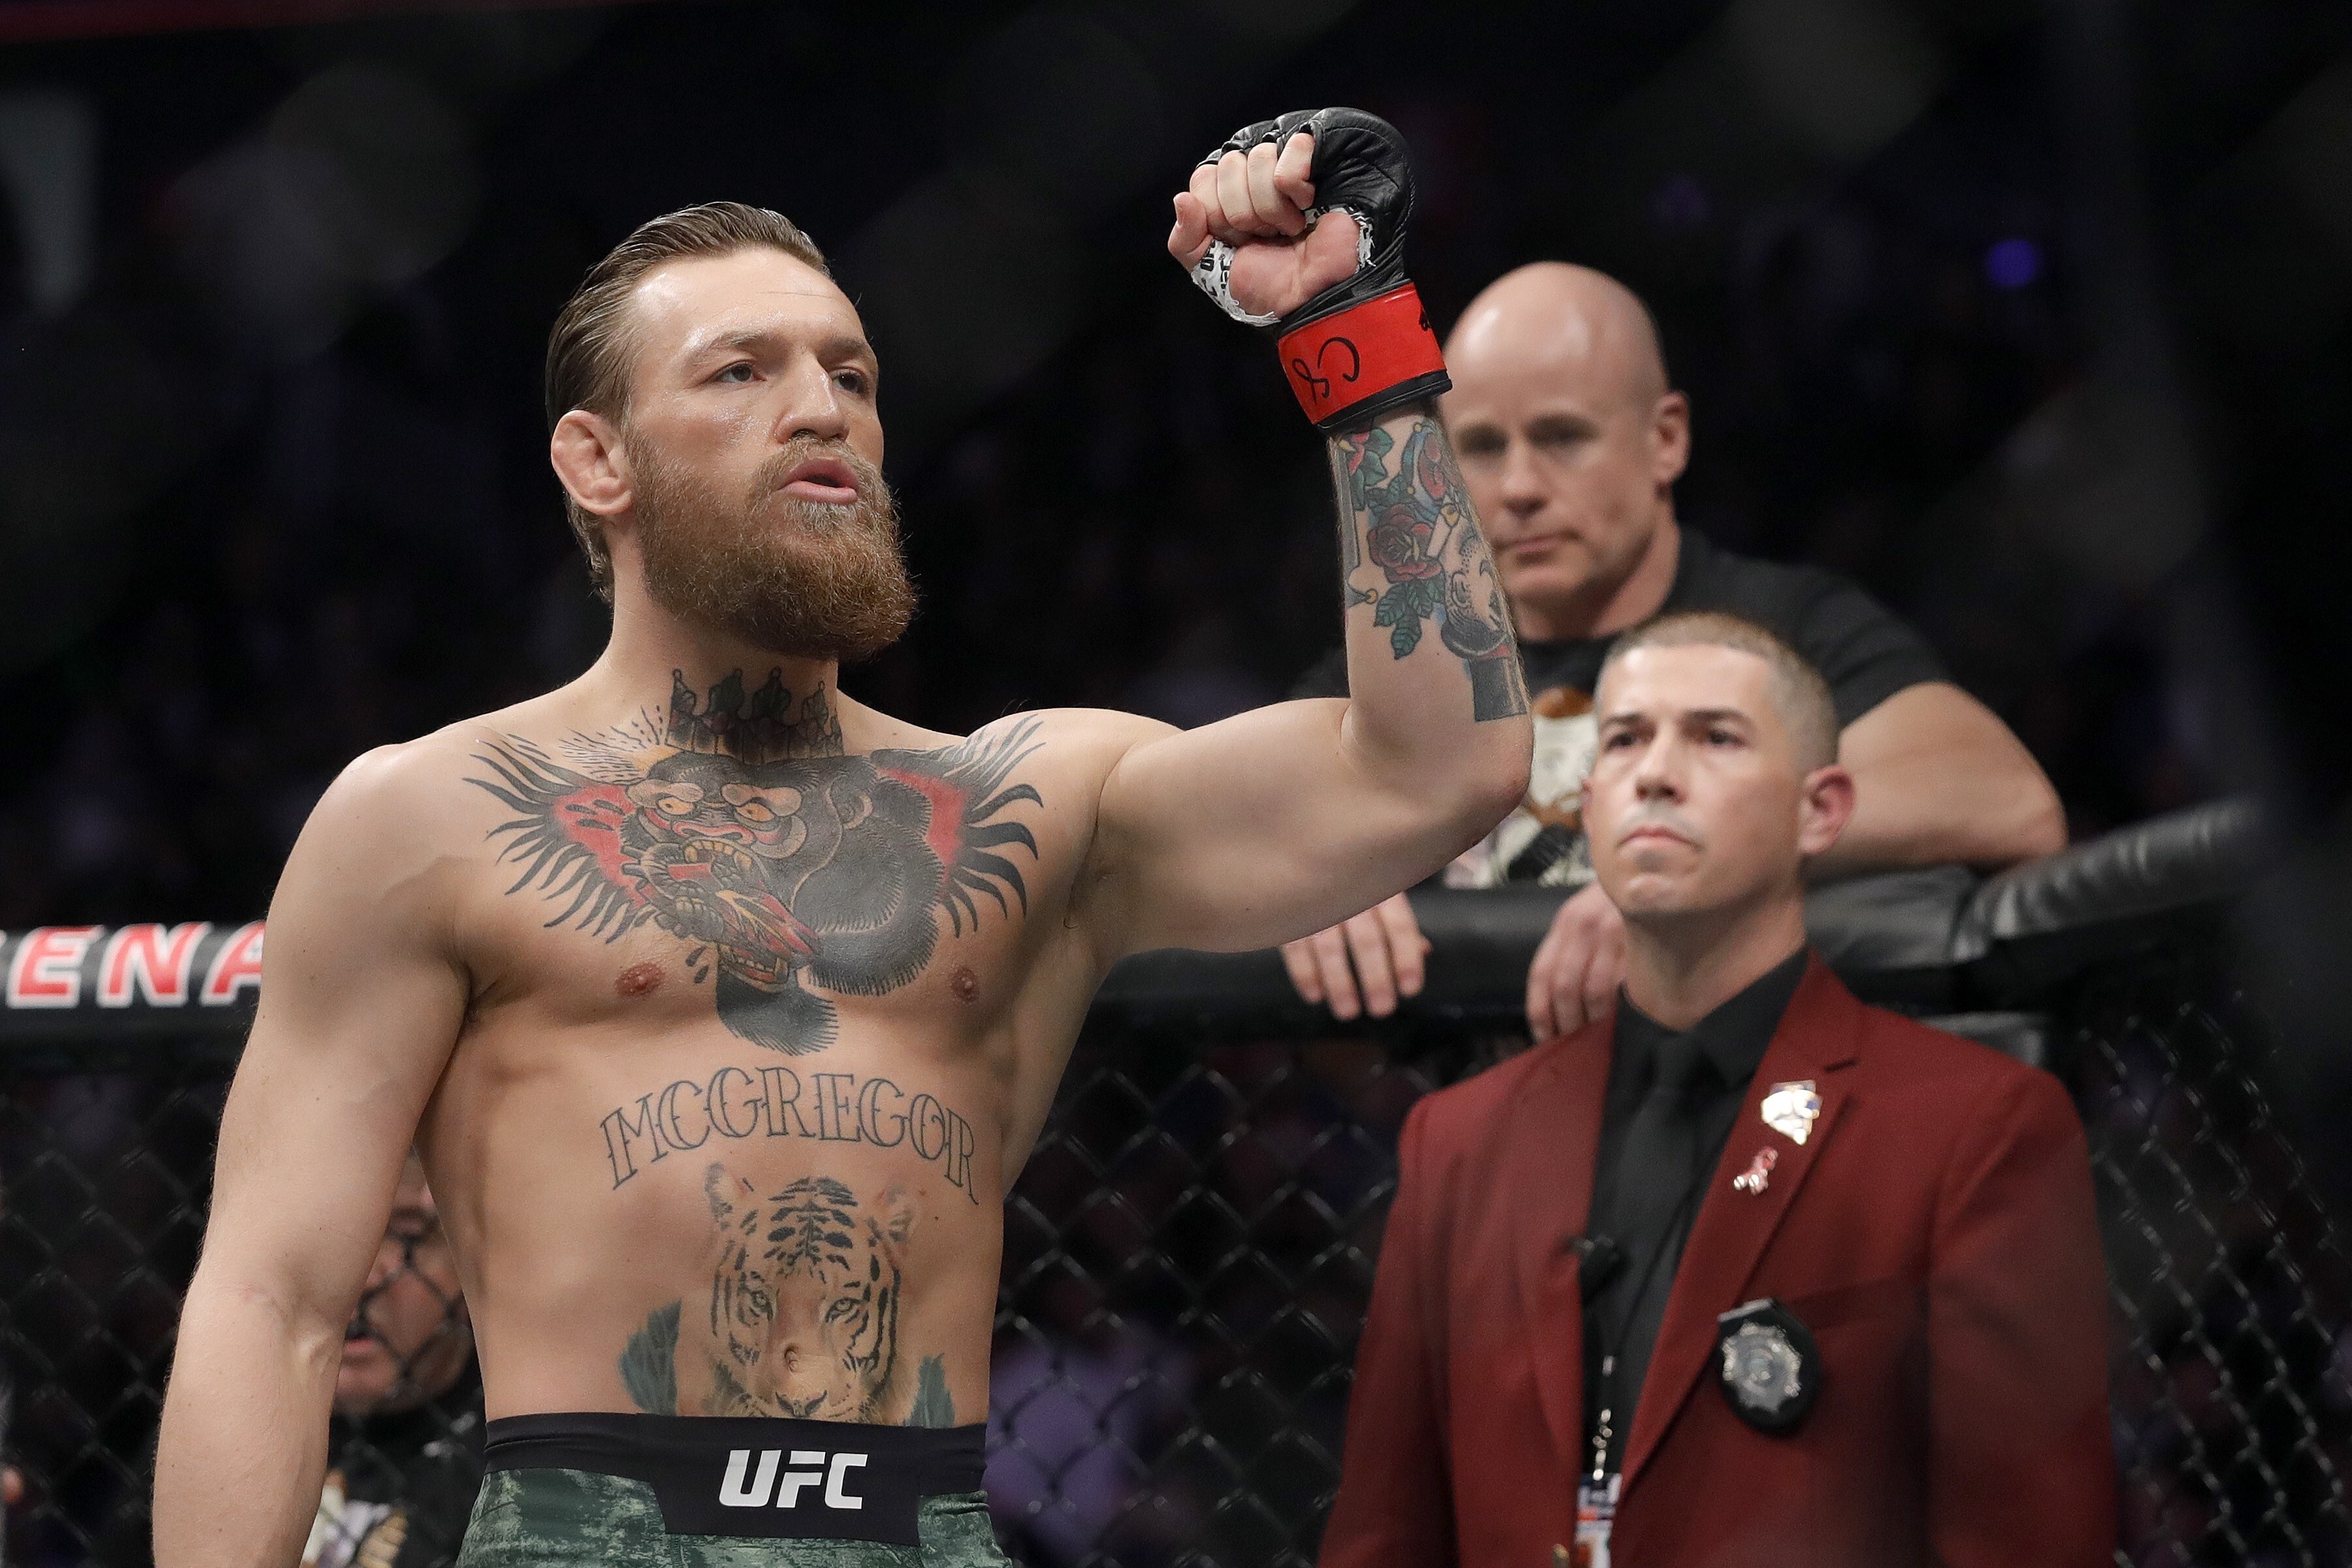 Conor McGregor reacts before taking on Donald Cerrone in their welterweight bout at UFC 246. Photo: AFP